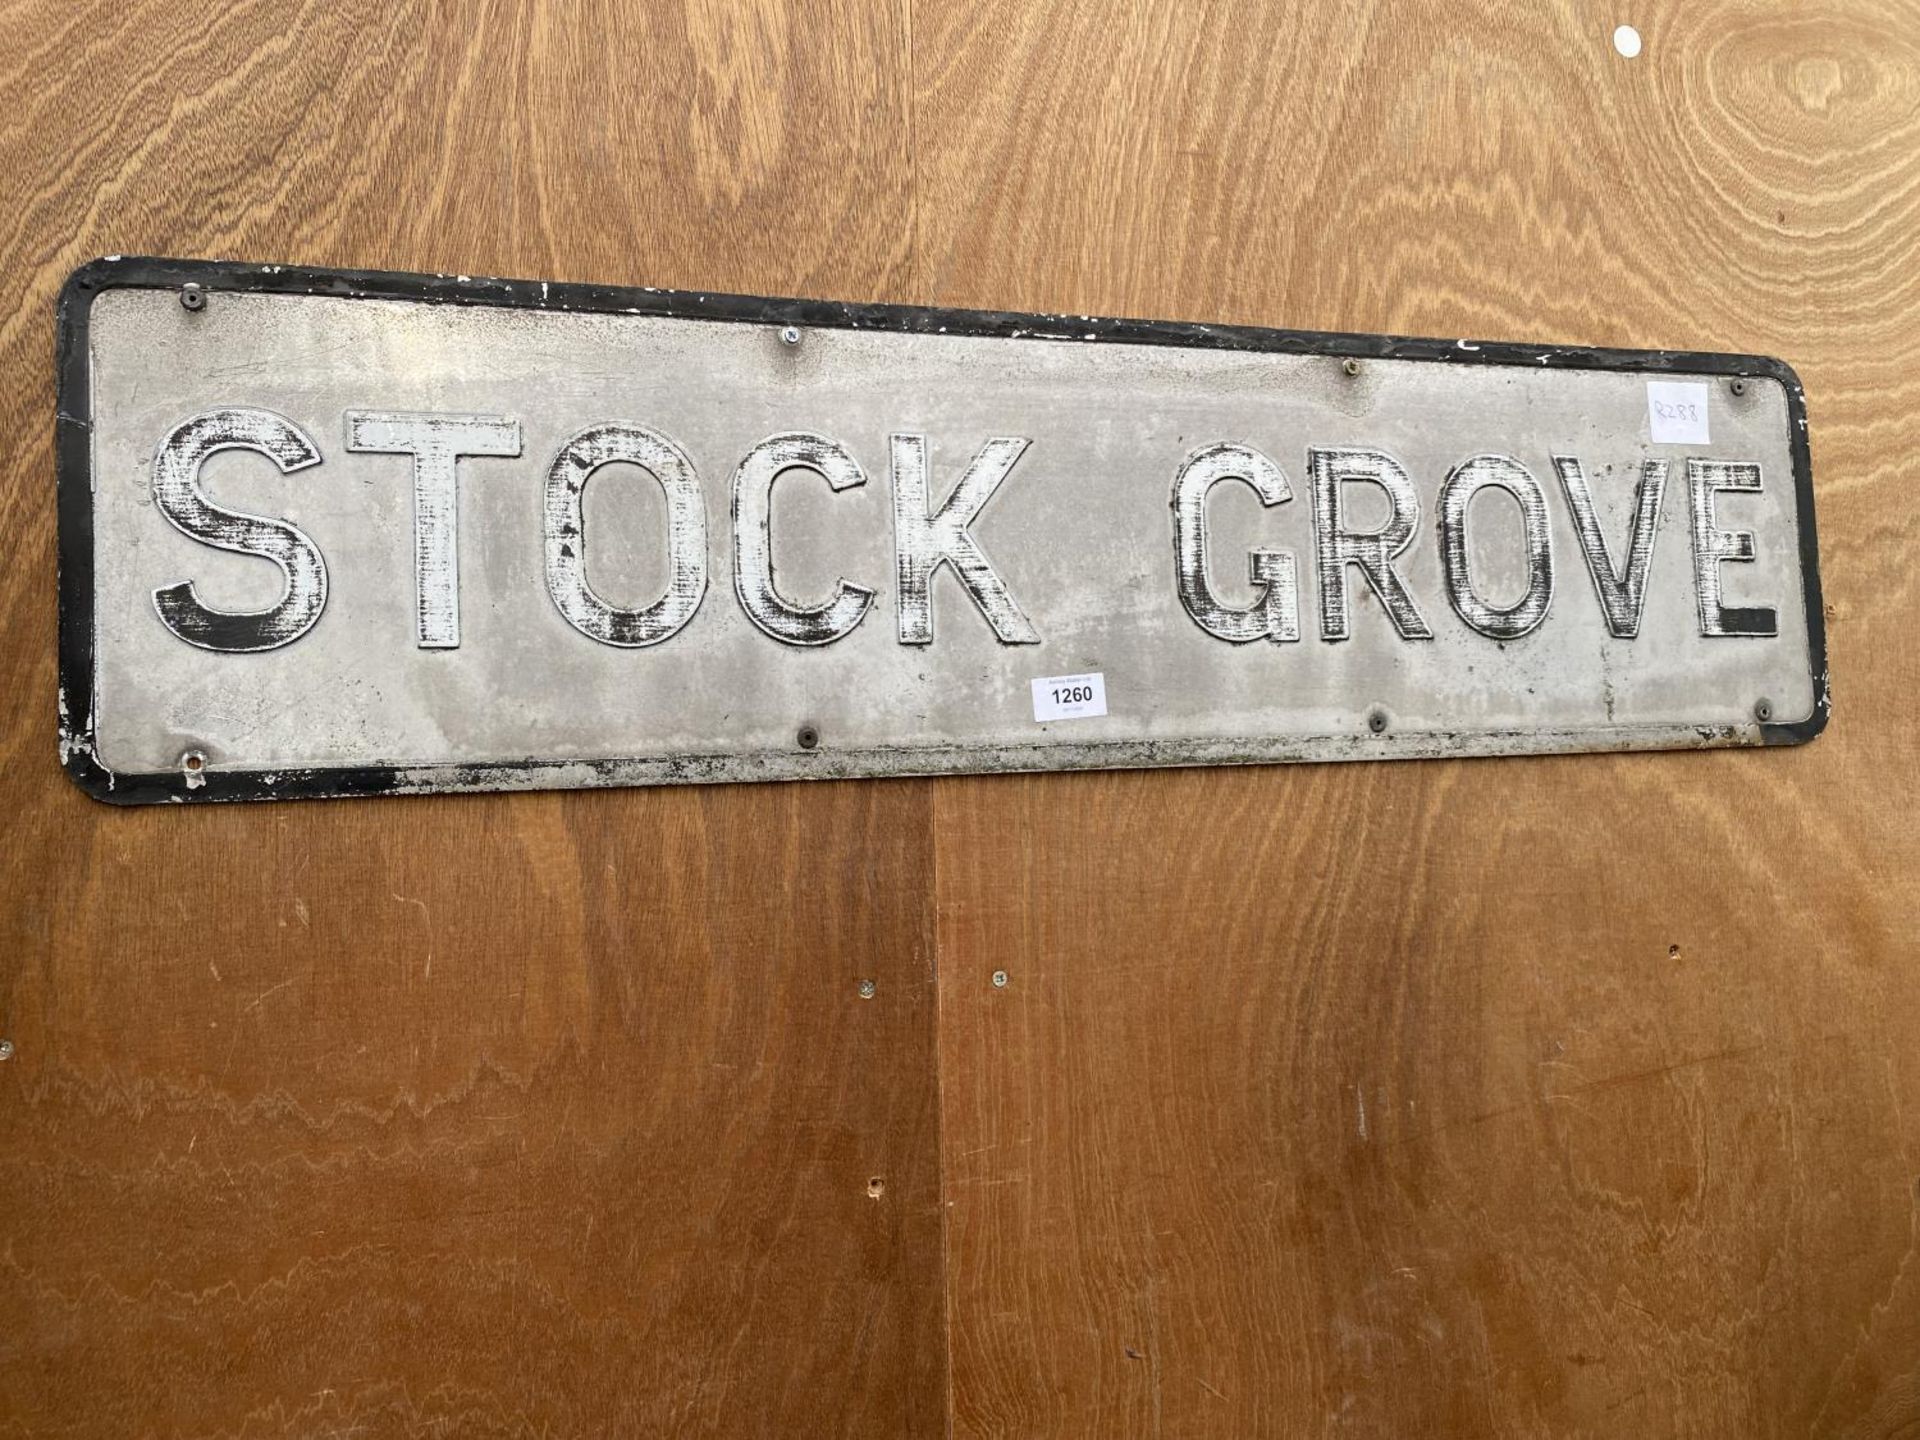 A VINTAGE METAL 'STOCK GROVE' ROAD SIGN